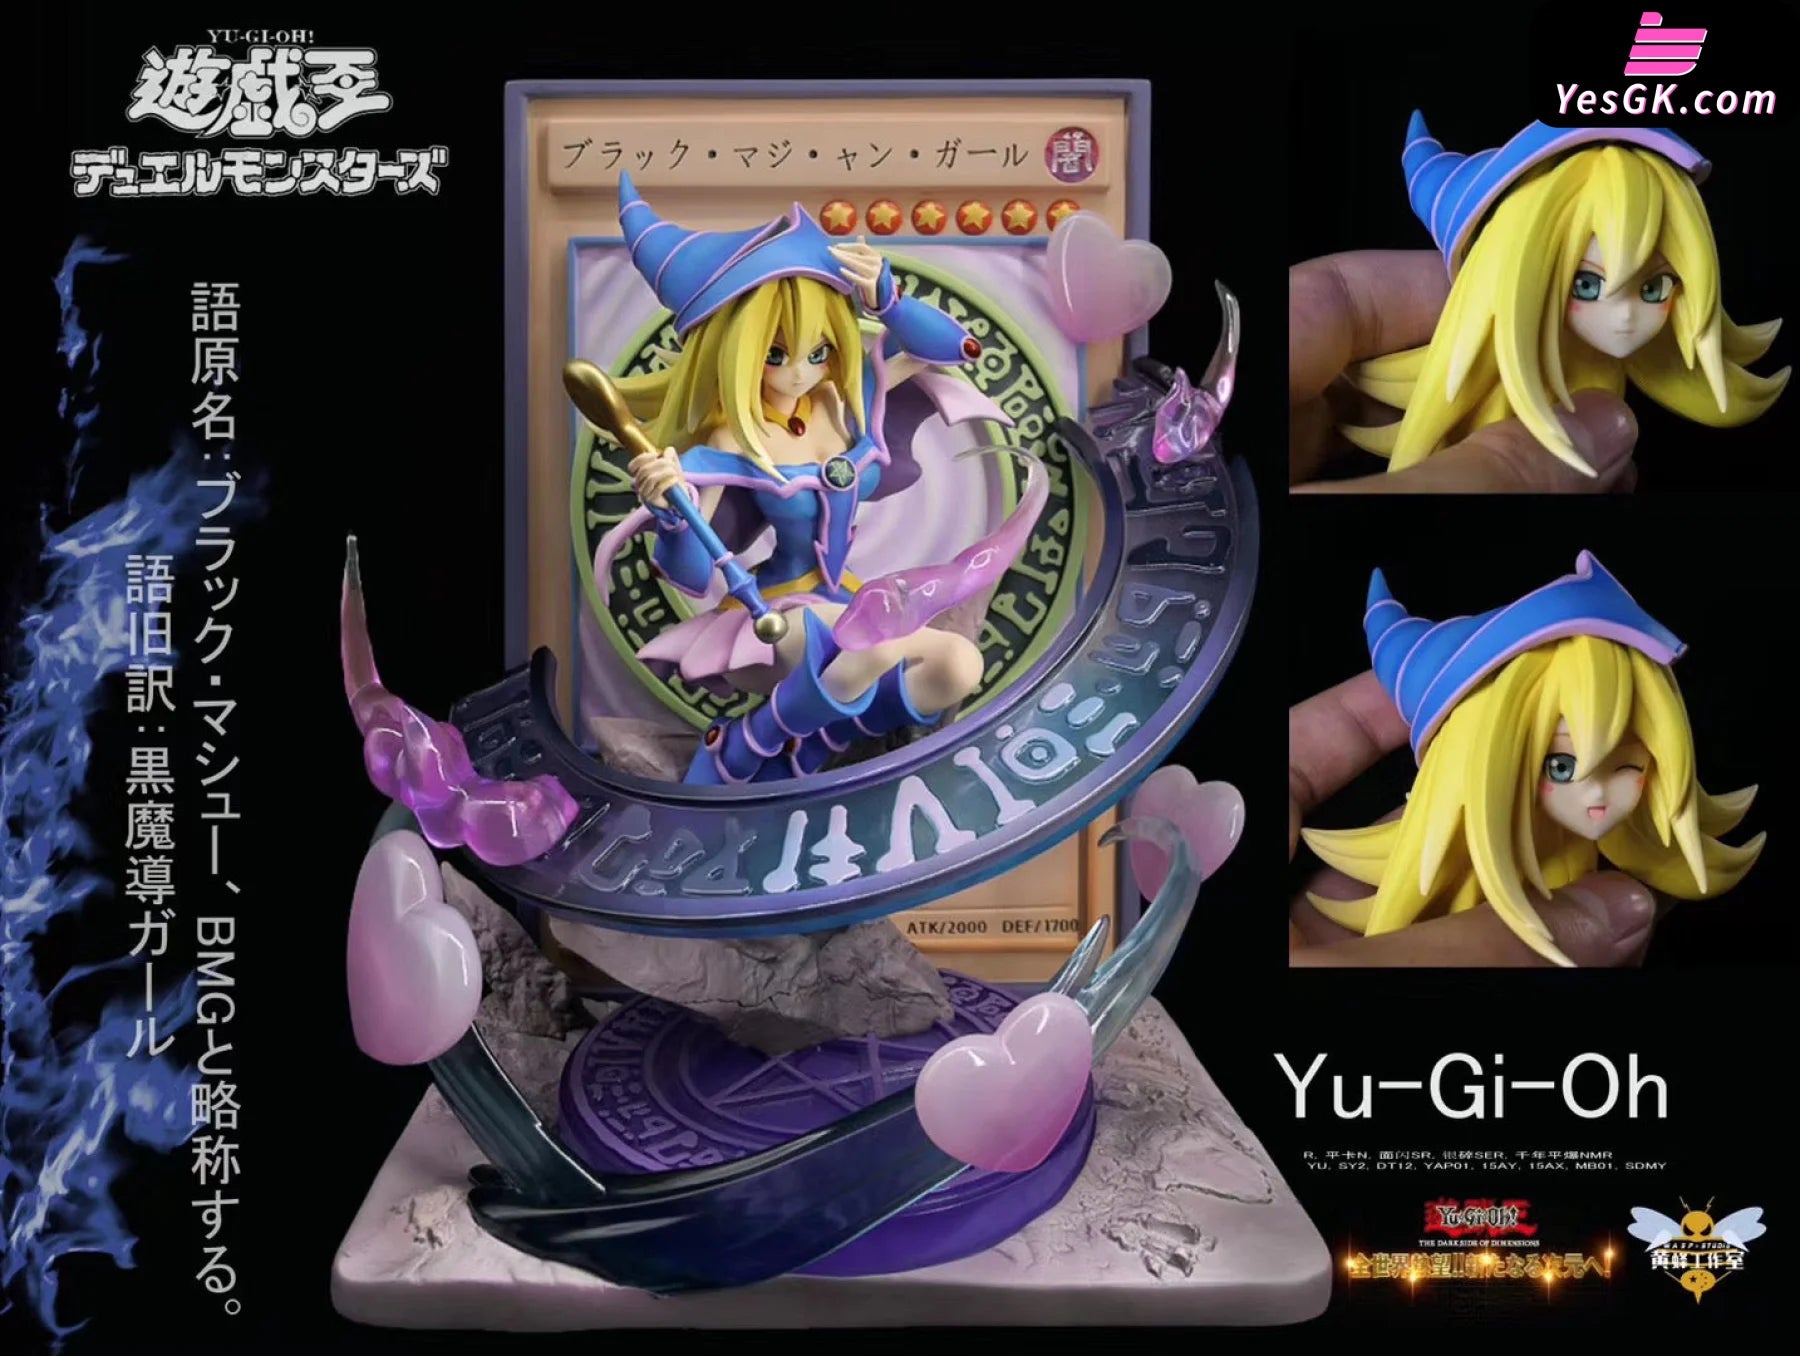 Duel Monsters/ Yu-Gi-Oh! - Dark Magician Girl From Wizards Cards Resin Statue Wasp Studio [In Stock]